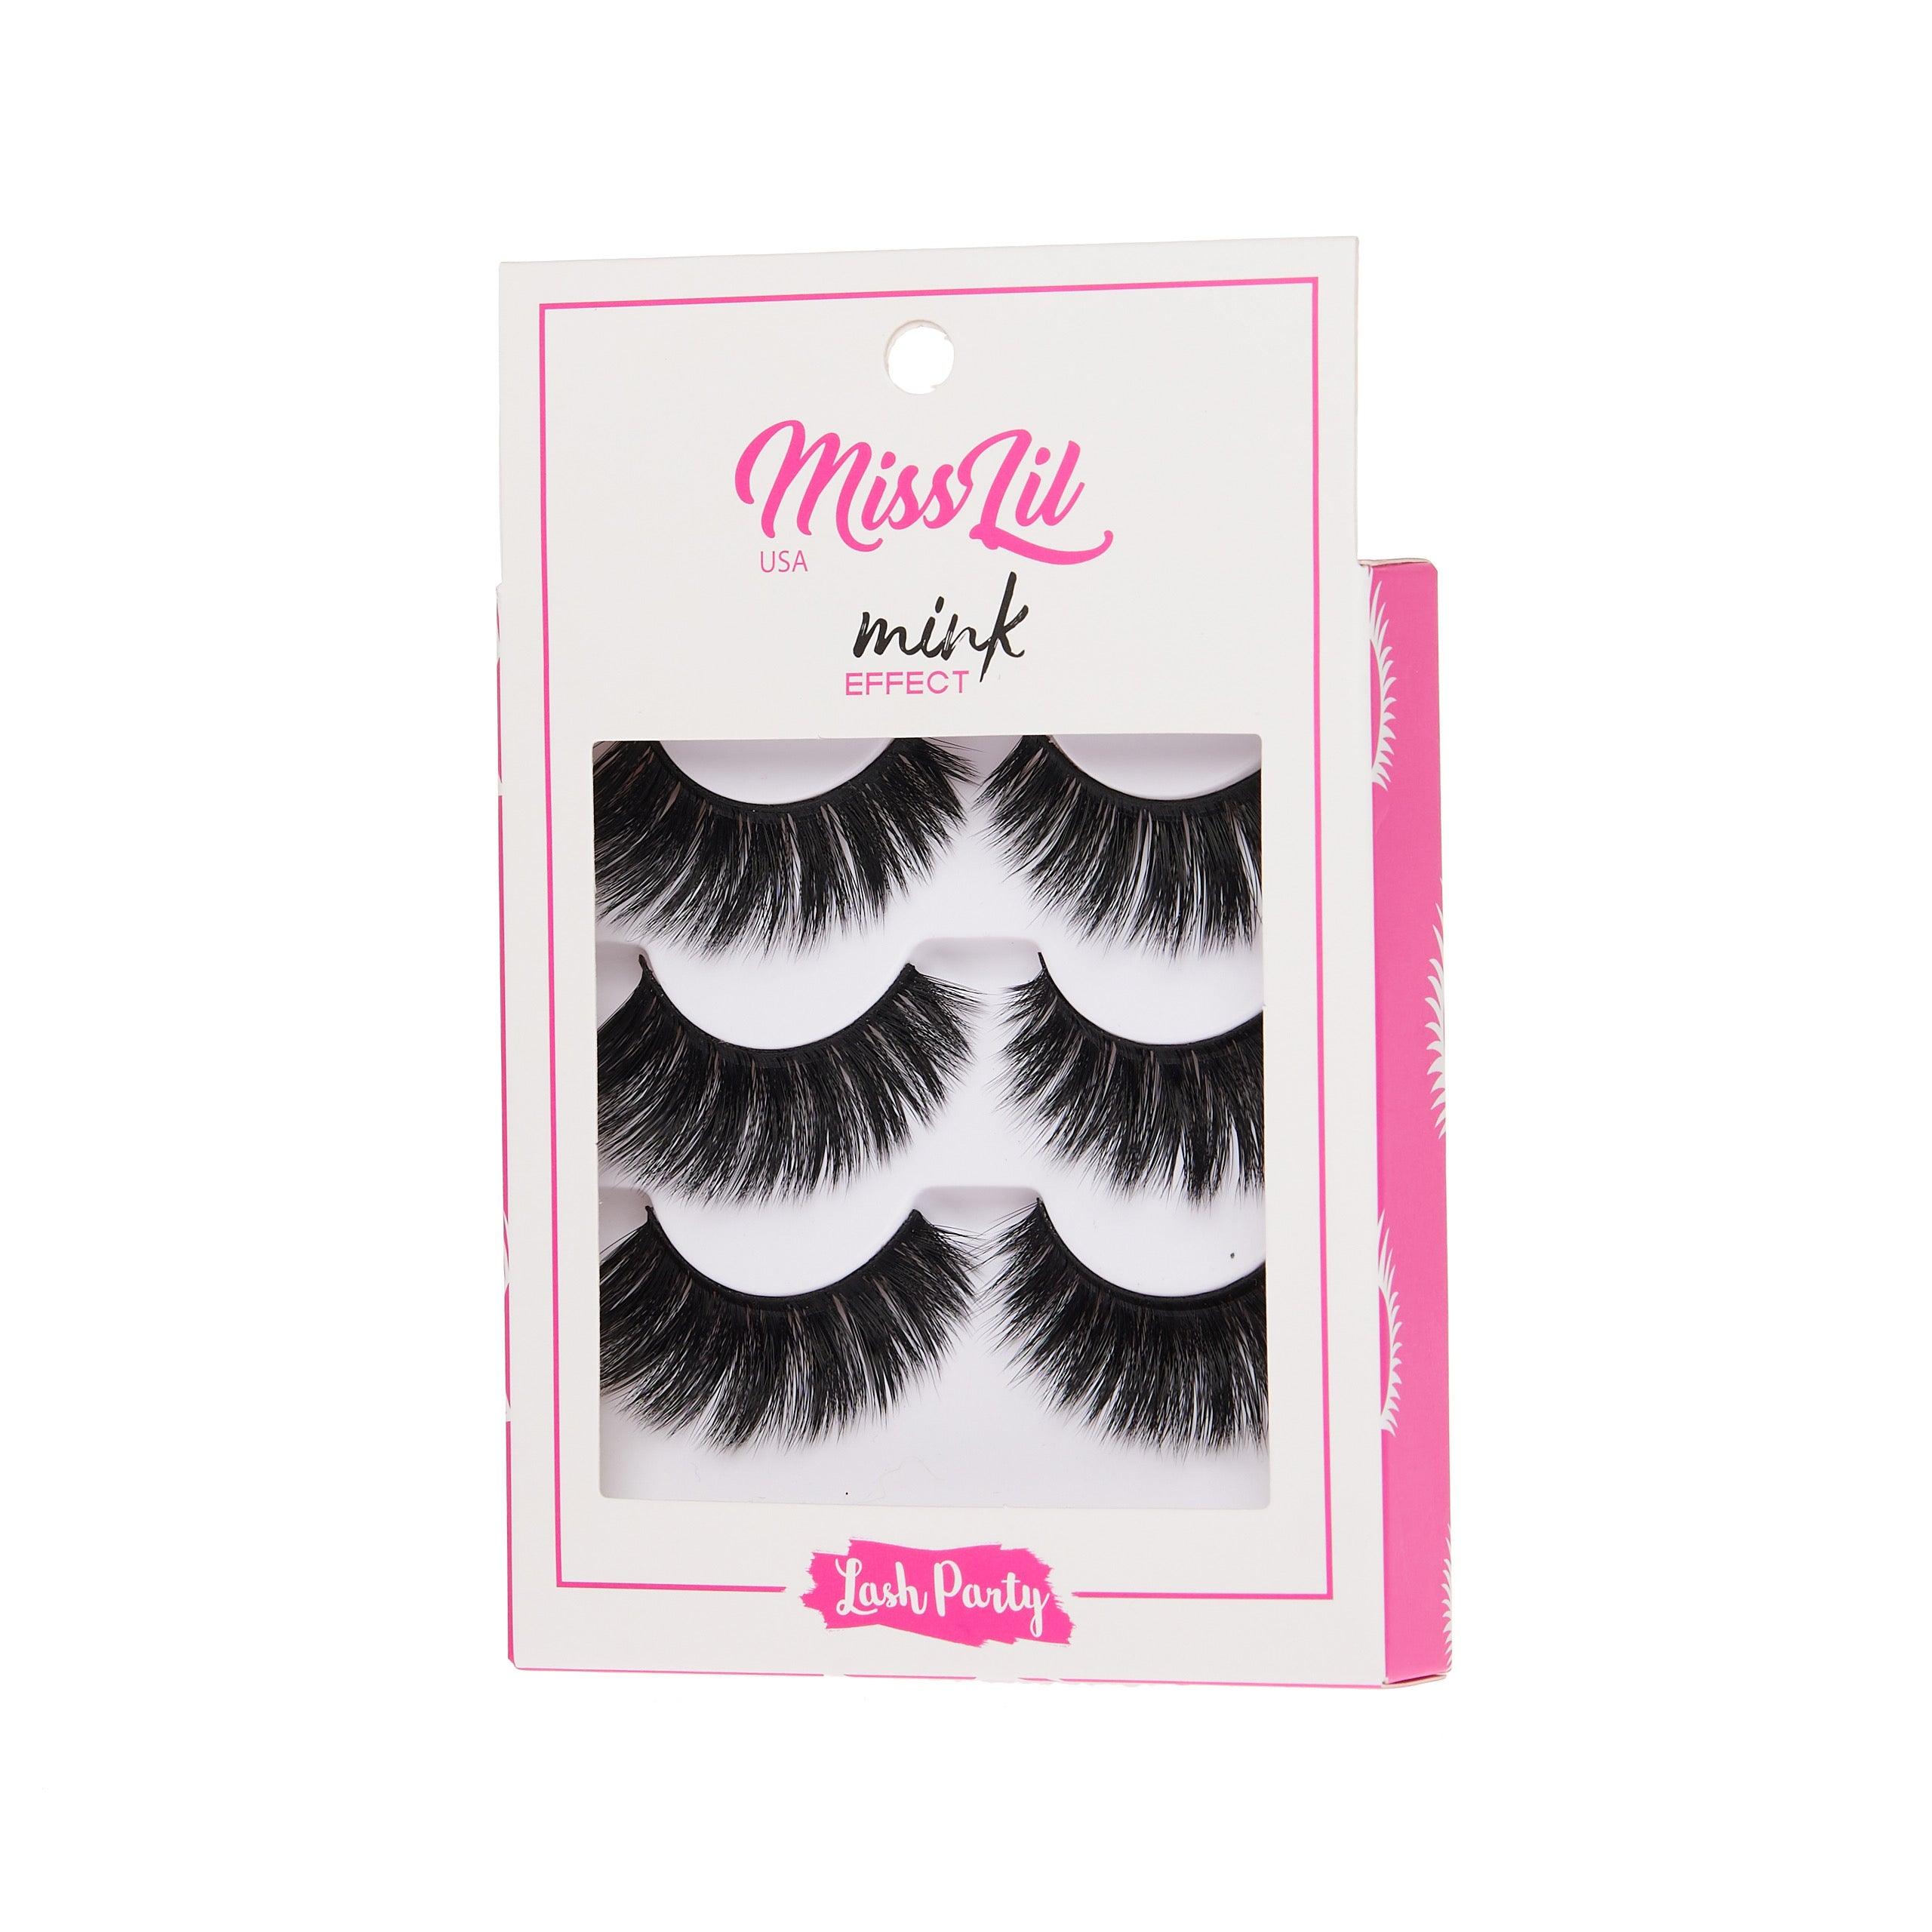 3-Pair Faux Mink Effect Eyelashes - Lash Party Collection #18 - Pack of 3 - Miss Lil USA